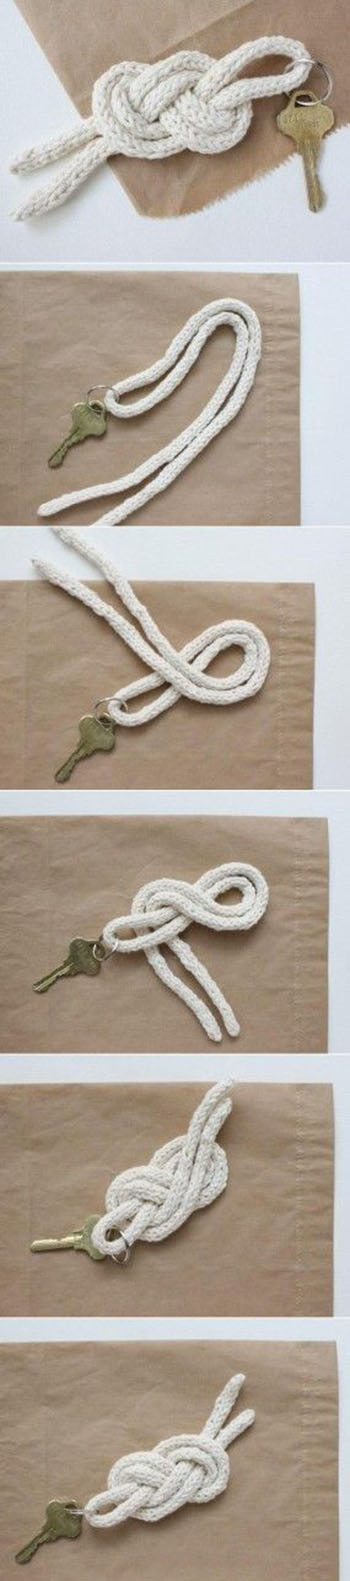 knot11